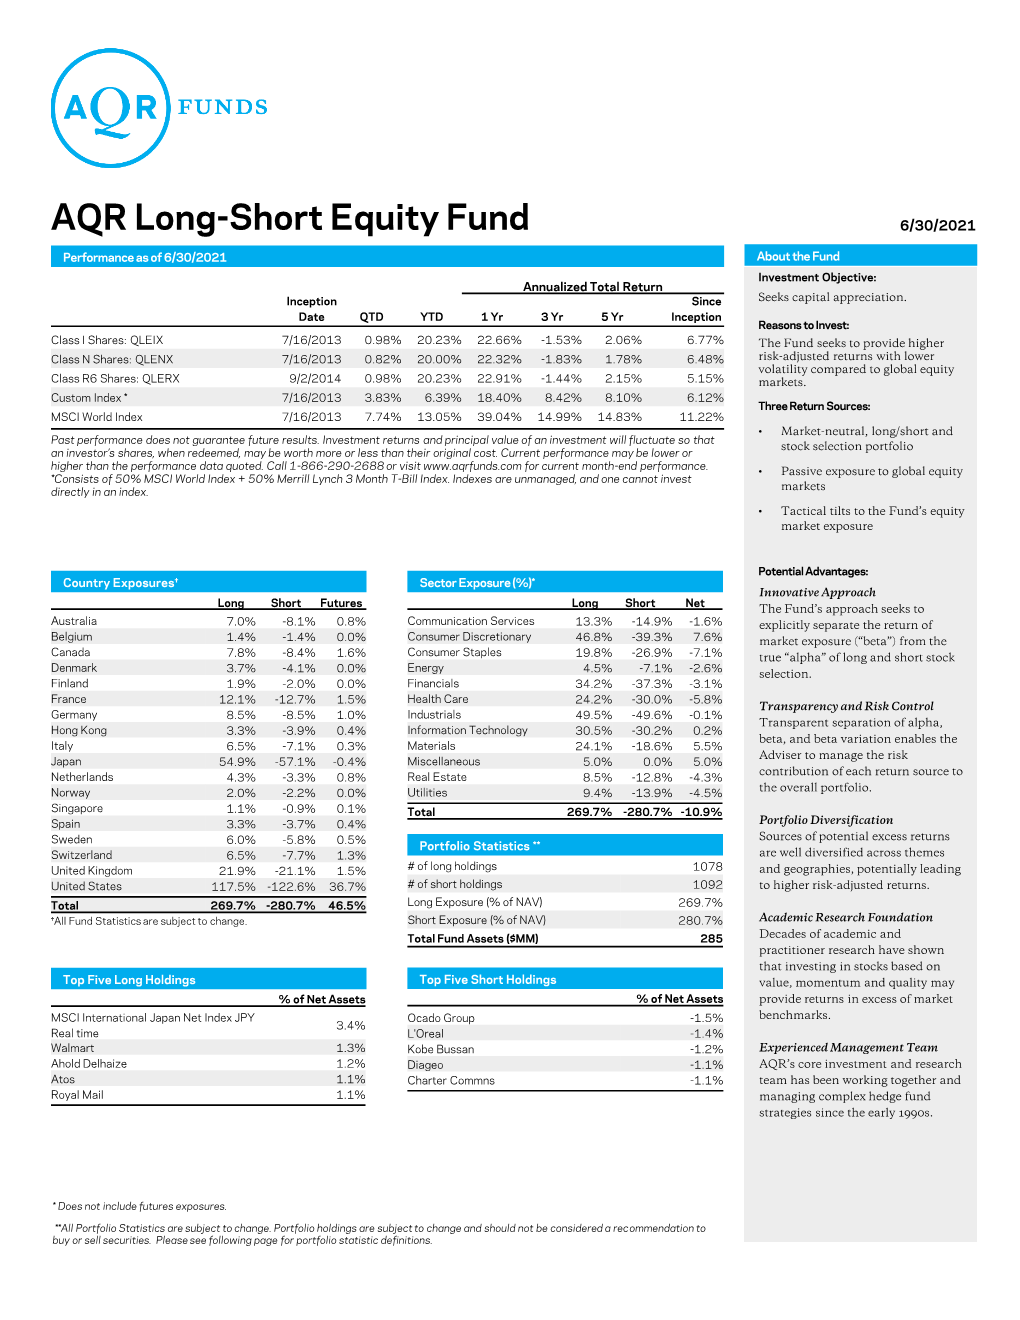 AQR Long-Short Equity Fund 6/30/2021